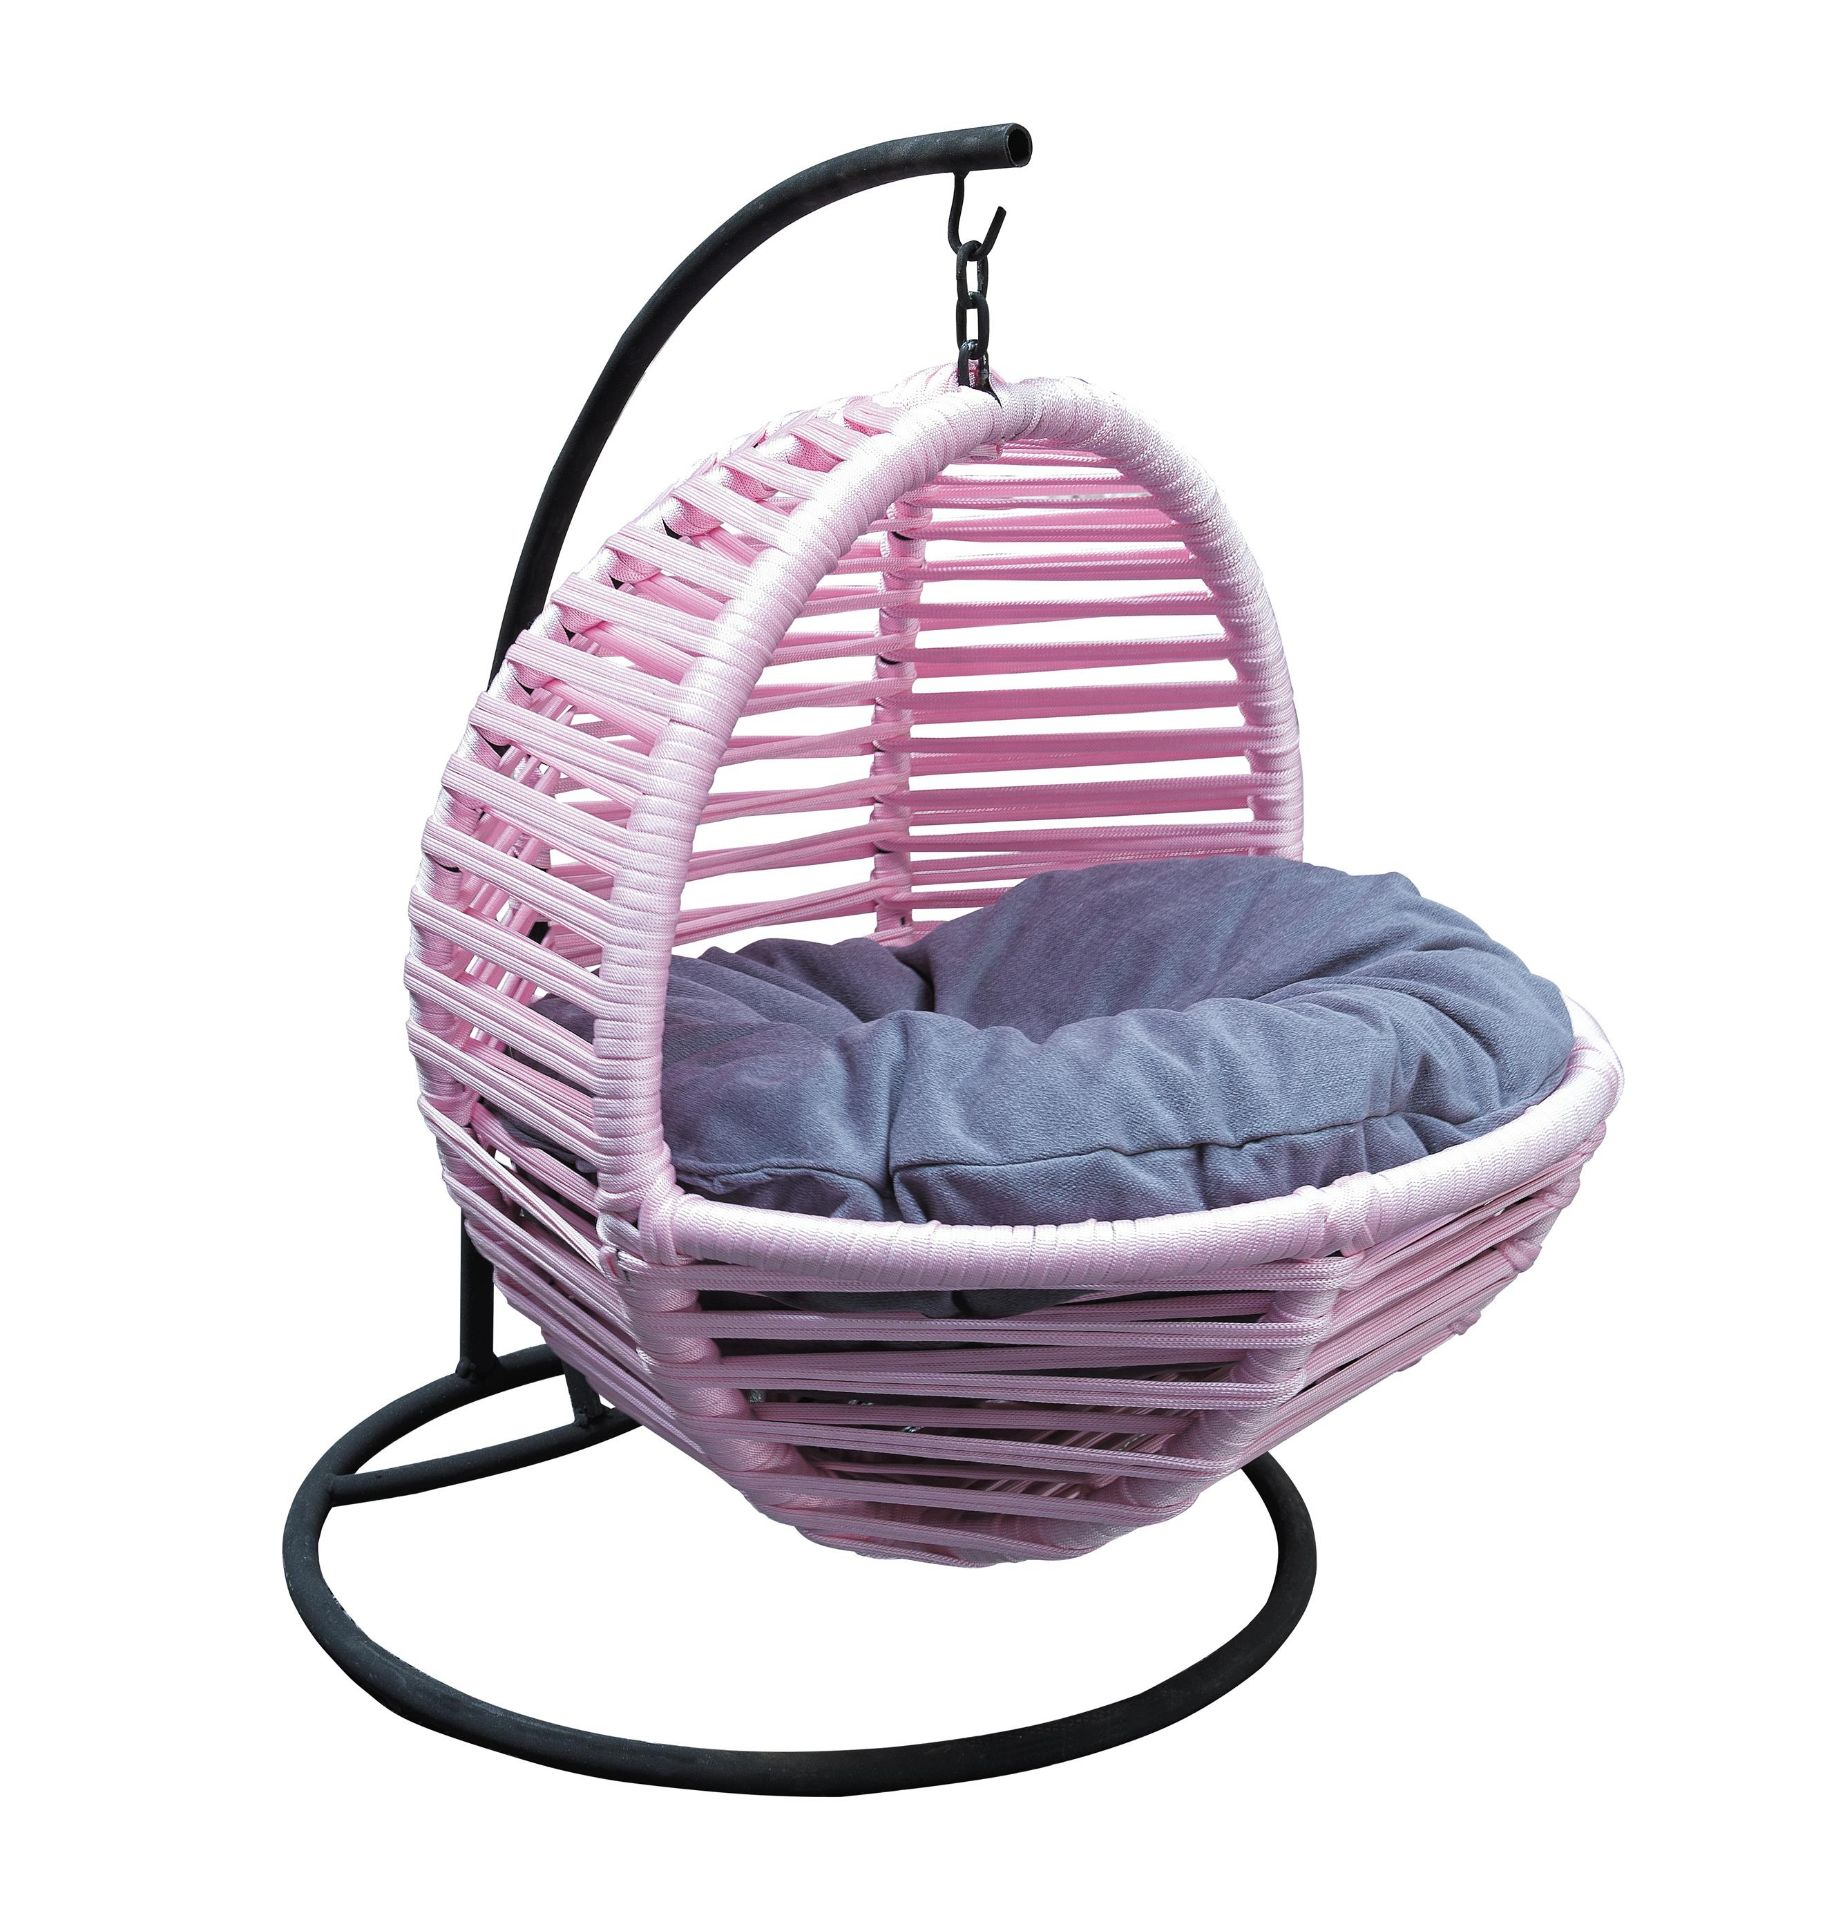 + VAT Brand New SRP £49.99 The Chelsea Garden Co Special Edition Pet Swing Chair/Bed - Pink - Ideal